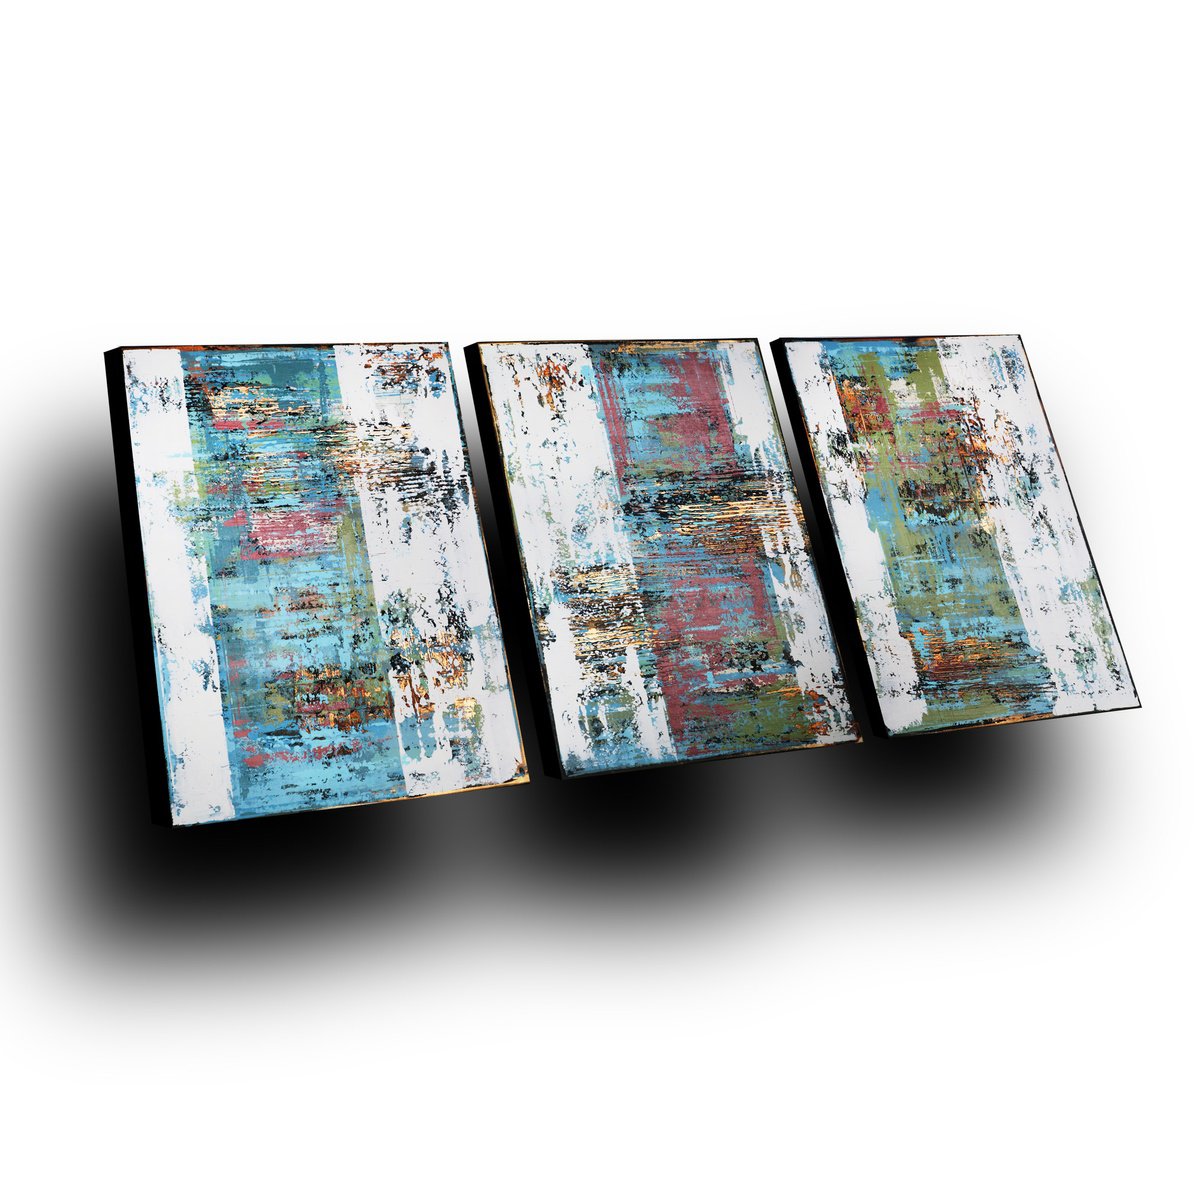 ABSTRACT TRILOGY - TRIPTYCH by Inez Froehlich